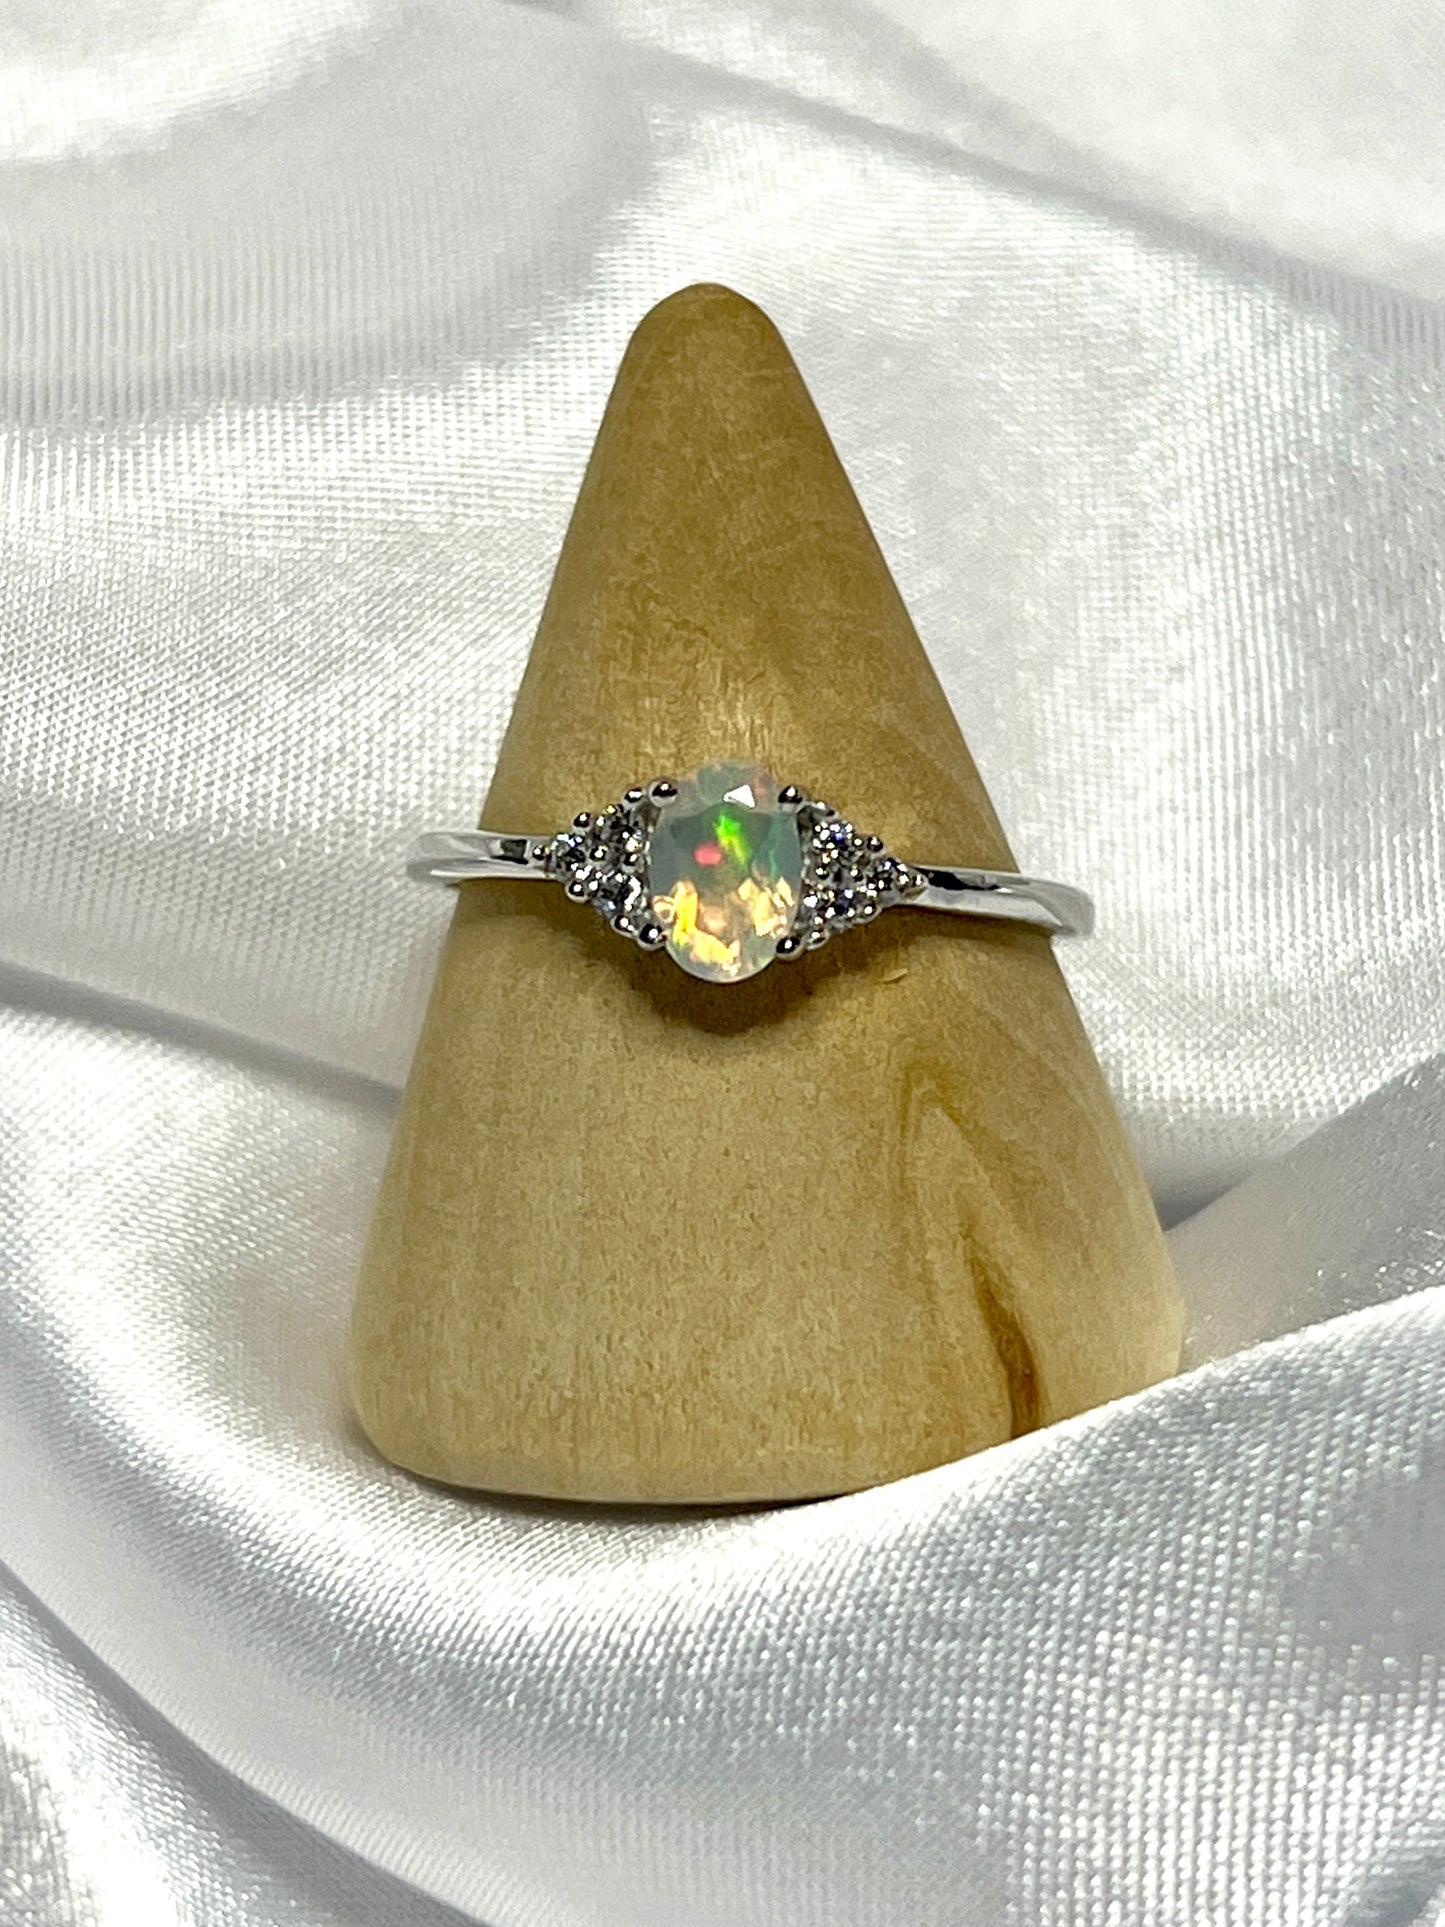 An Ethiopian Opal Ring with Cubic Zirconia Stones and diamond statement ring.